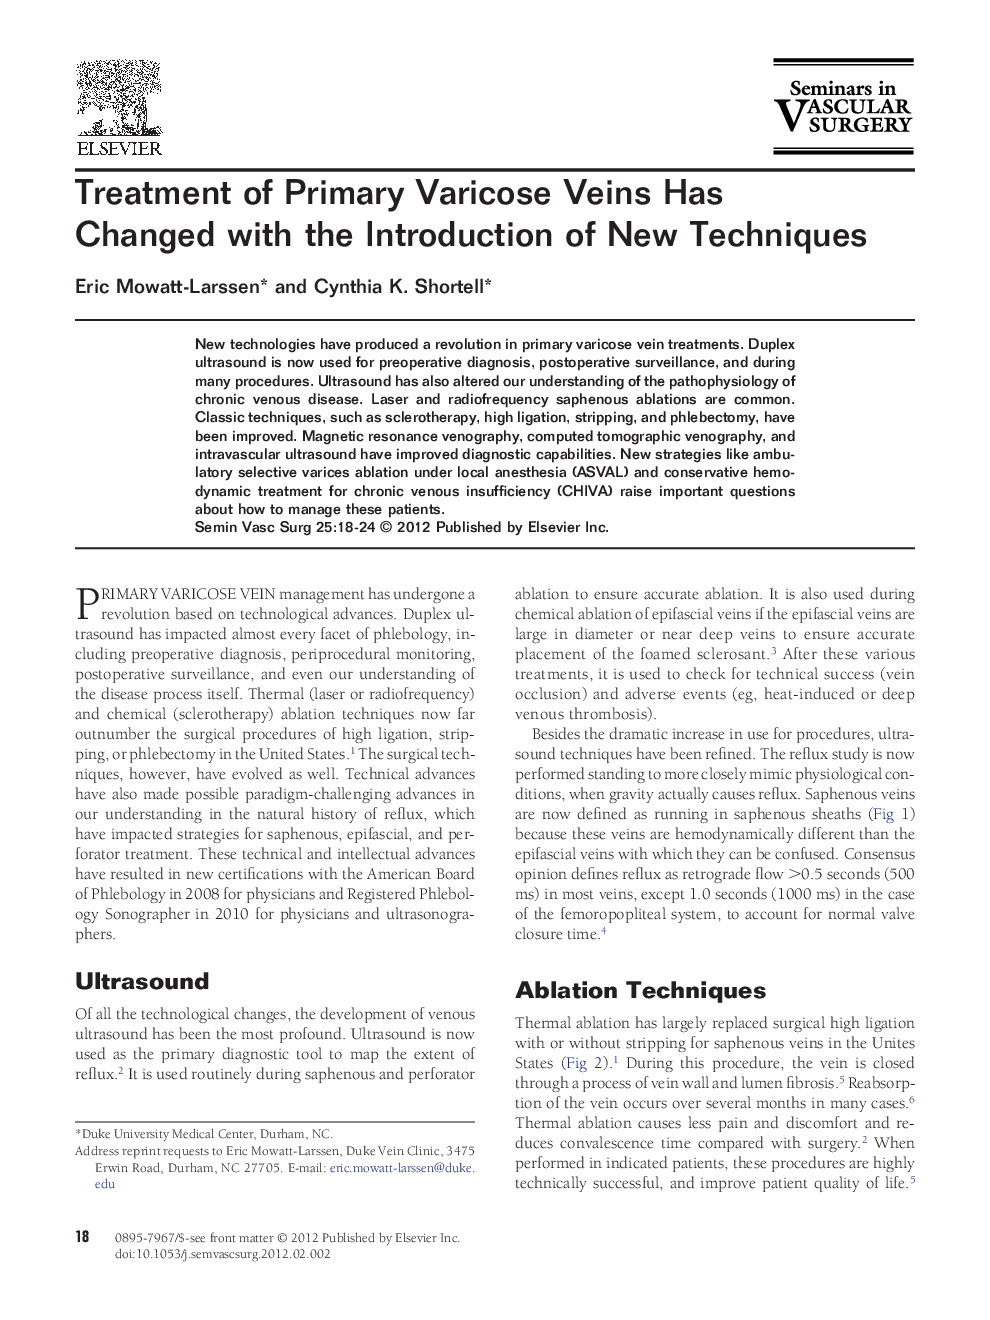 Treatment of Primary Varicose Veins Has Changed with the Introduction of New Techniques